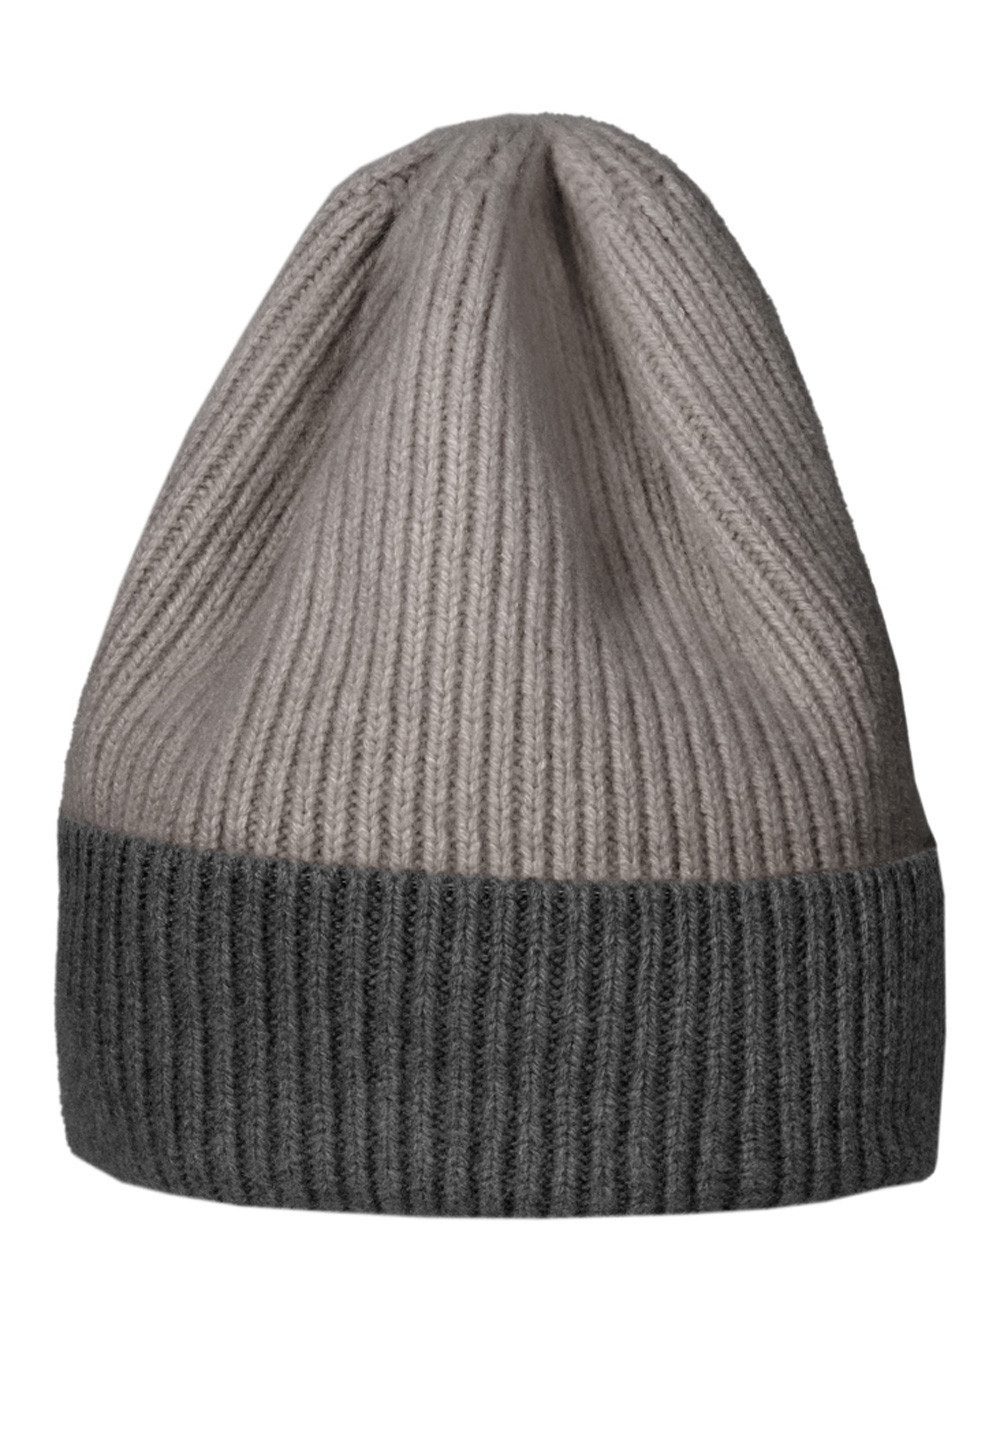 in Europe CAPO-JOSS Ka CAP up Made Strickmütze two-coloured, CAPO turn ribbed taupe cap,